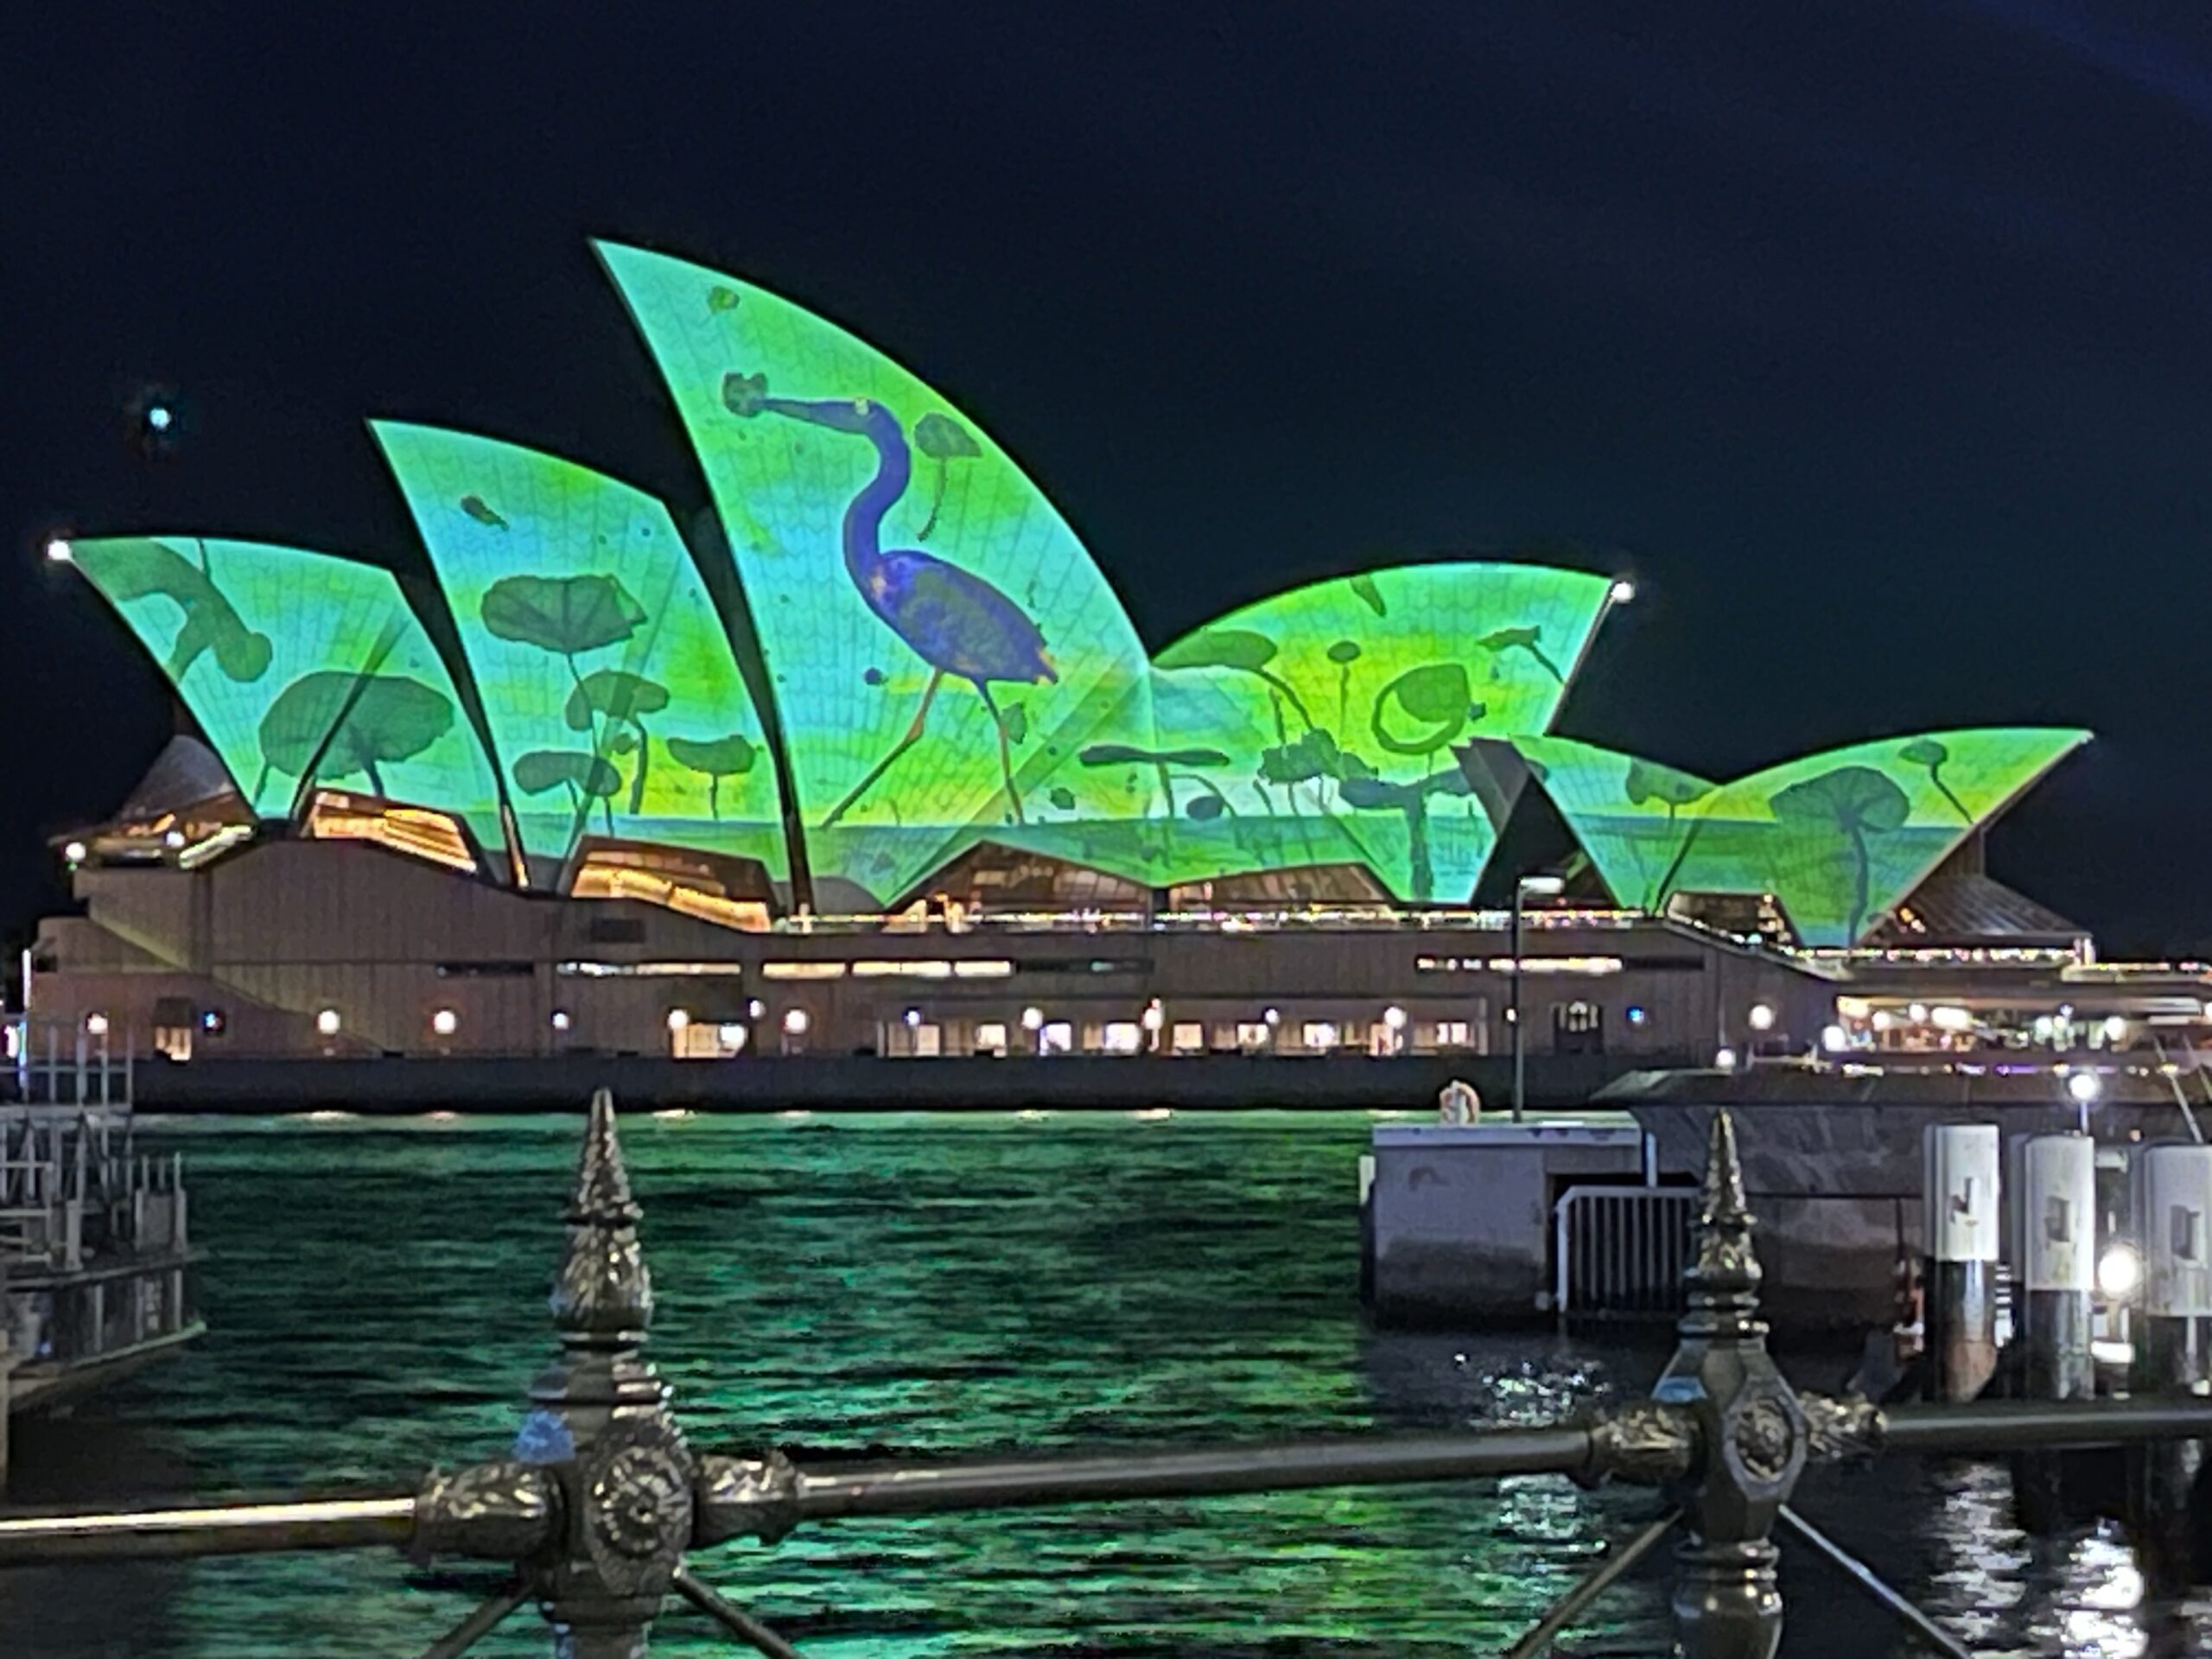 Sydney OperalHouse with special lights